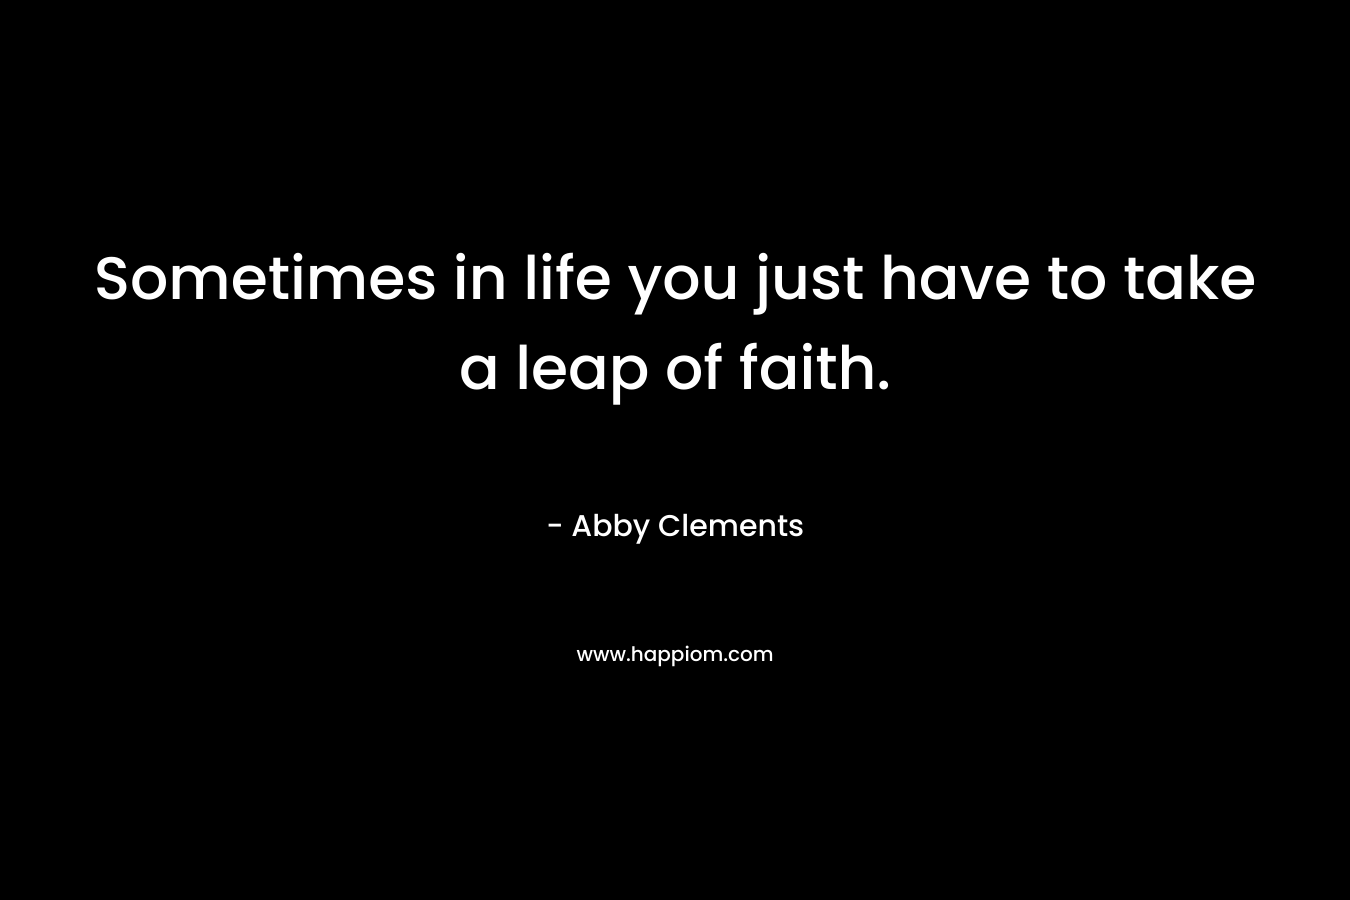 Sometimes in life you just have to take a leap of faith. – Abby Clements